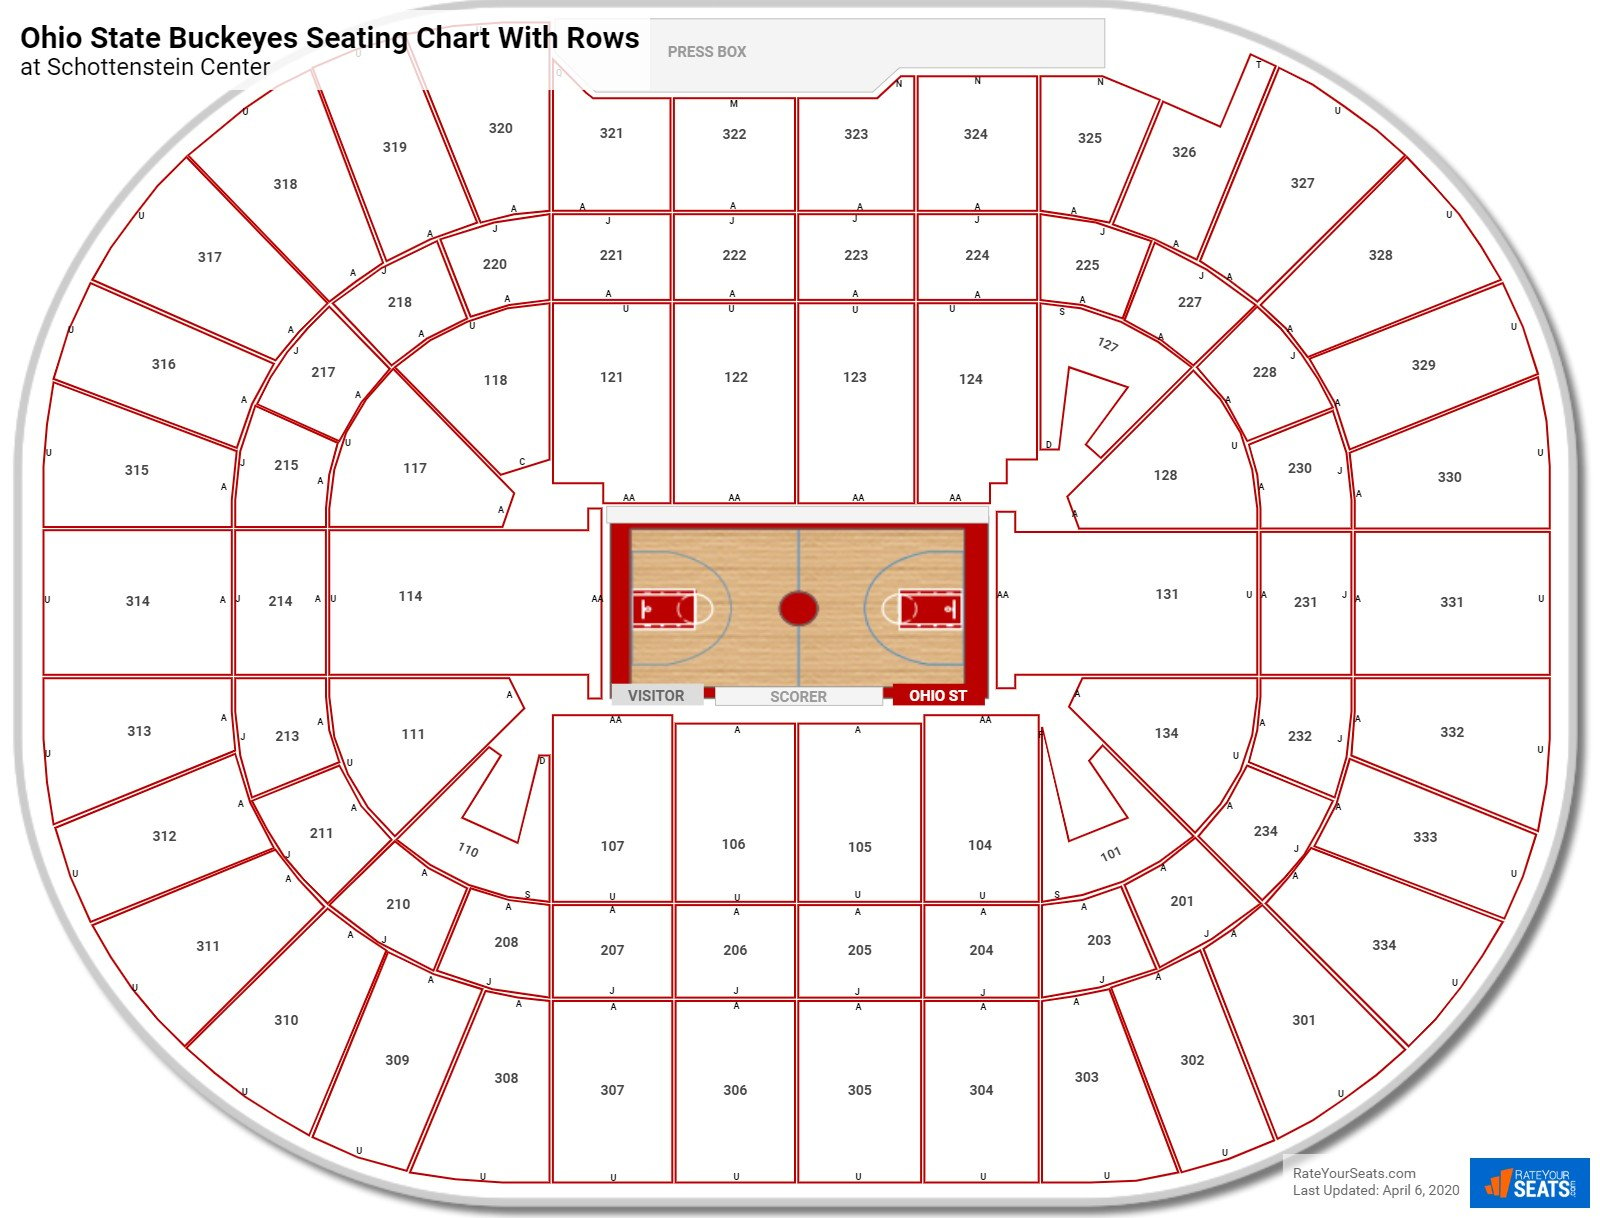 Schottenstein Center seating chart with row numbers